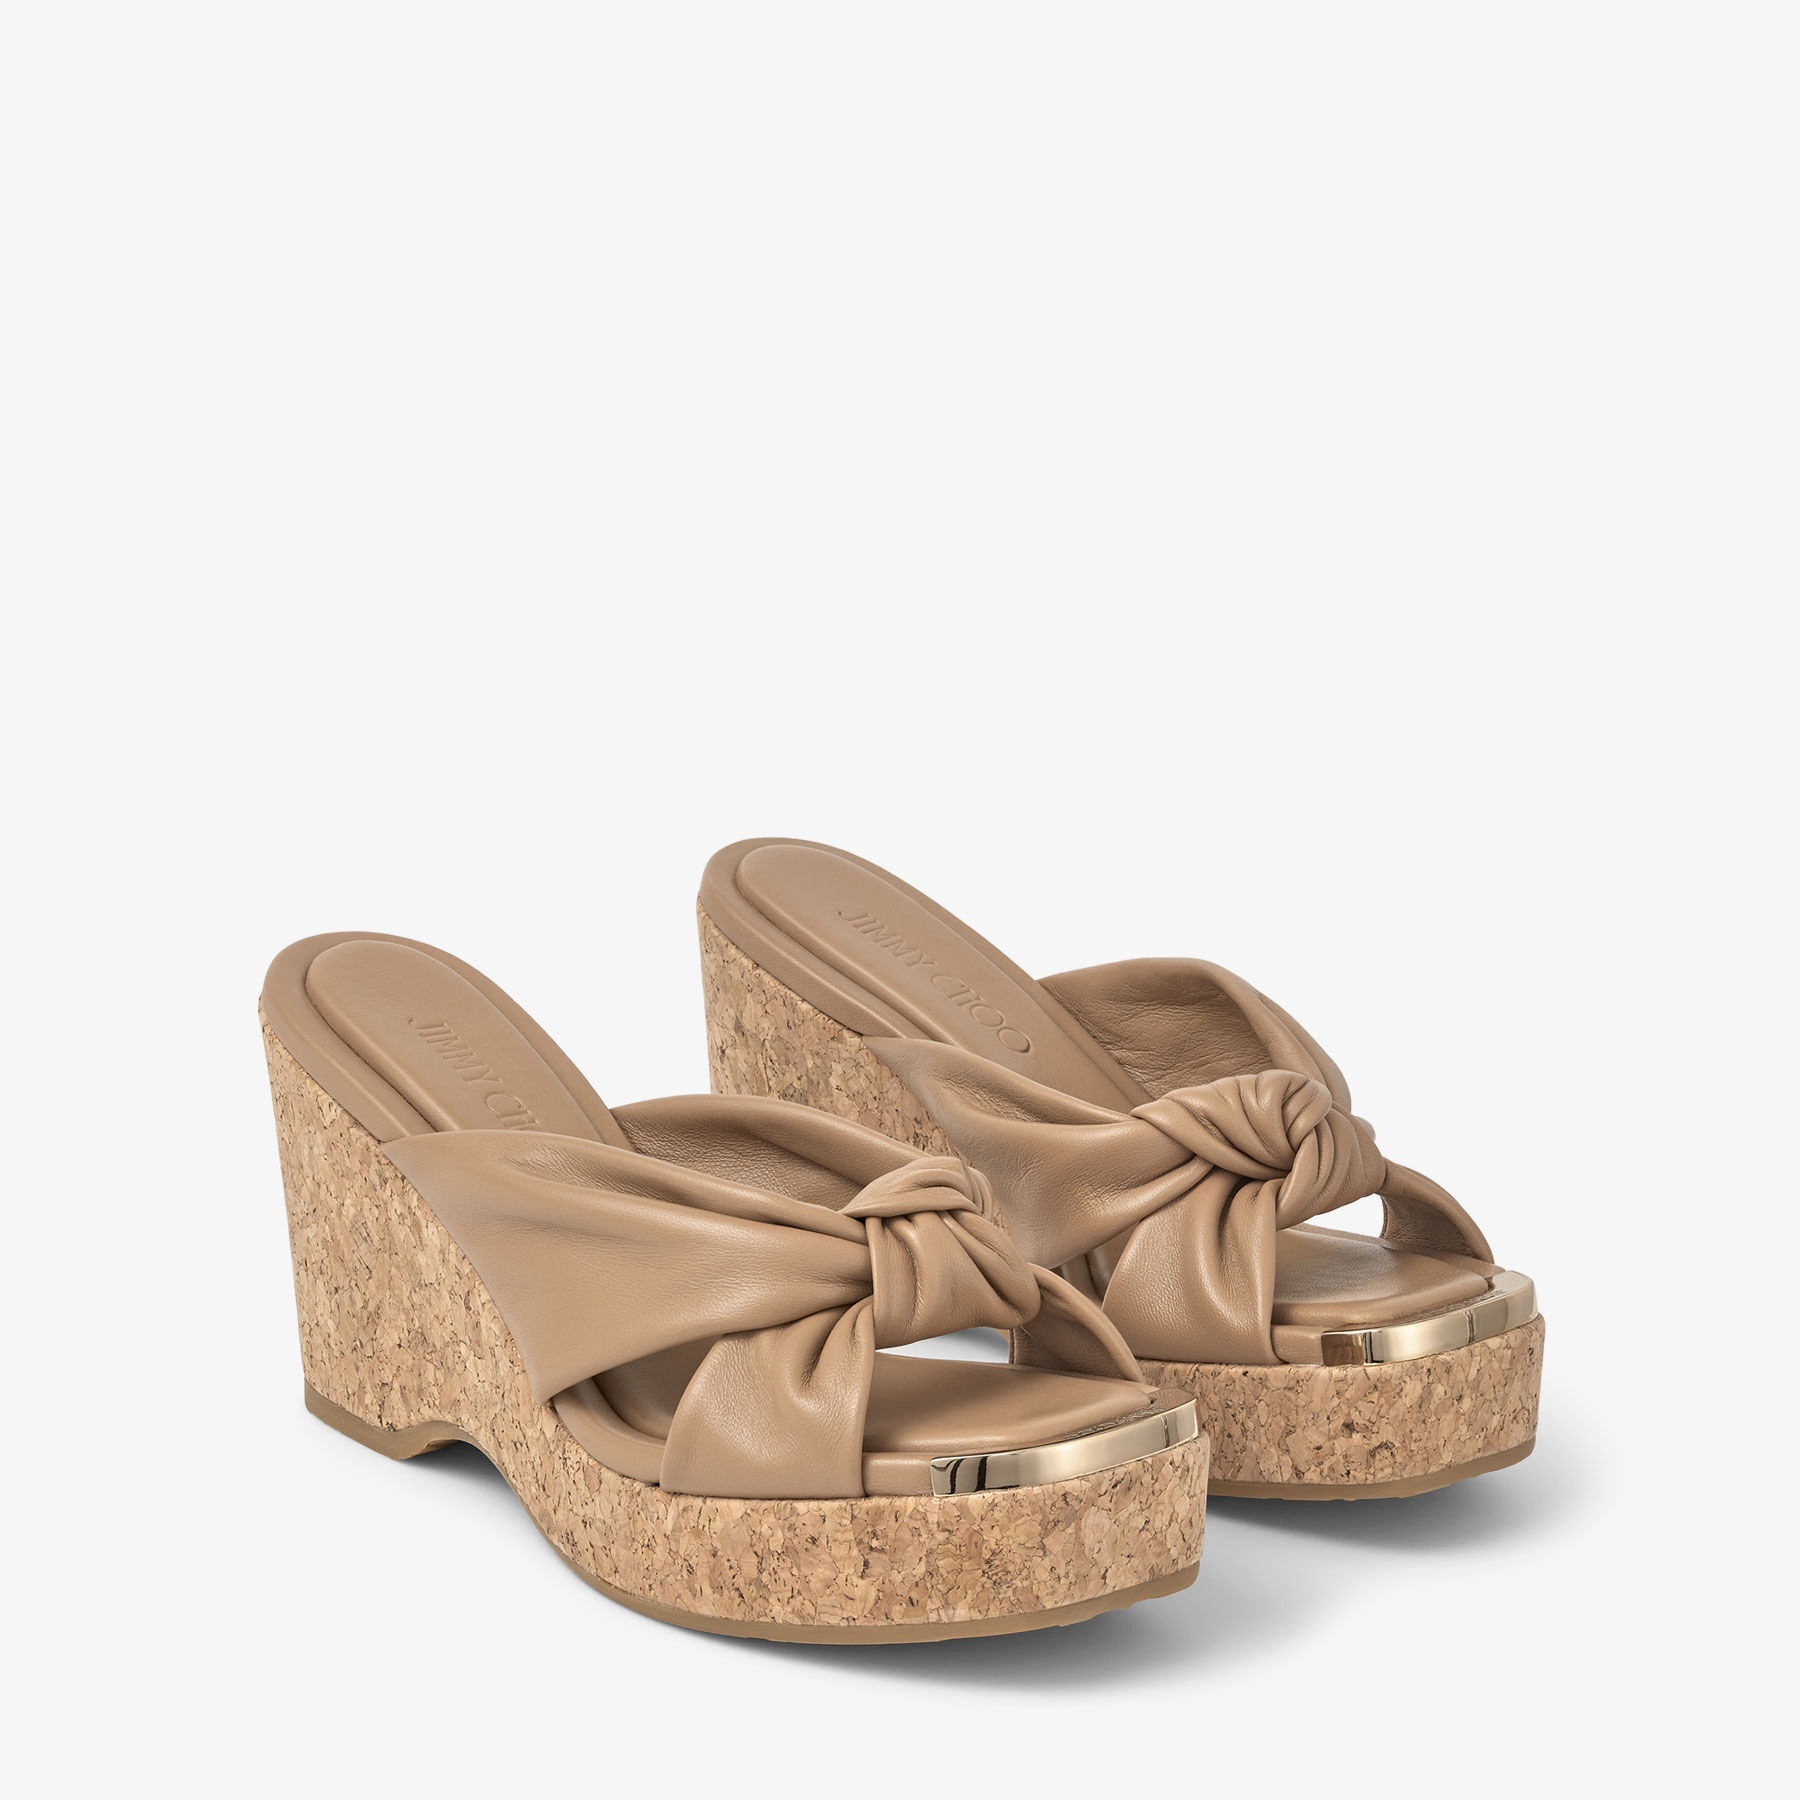 Avenue Wedge 110
Biscuit Nappa Leather Wedge Mules - 2